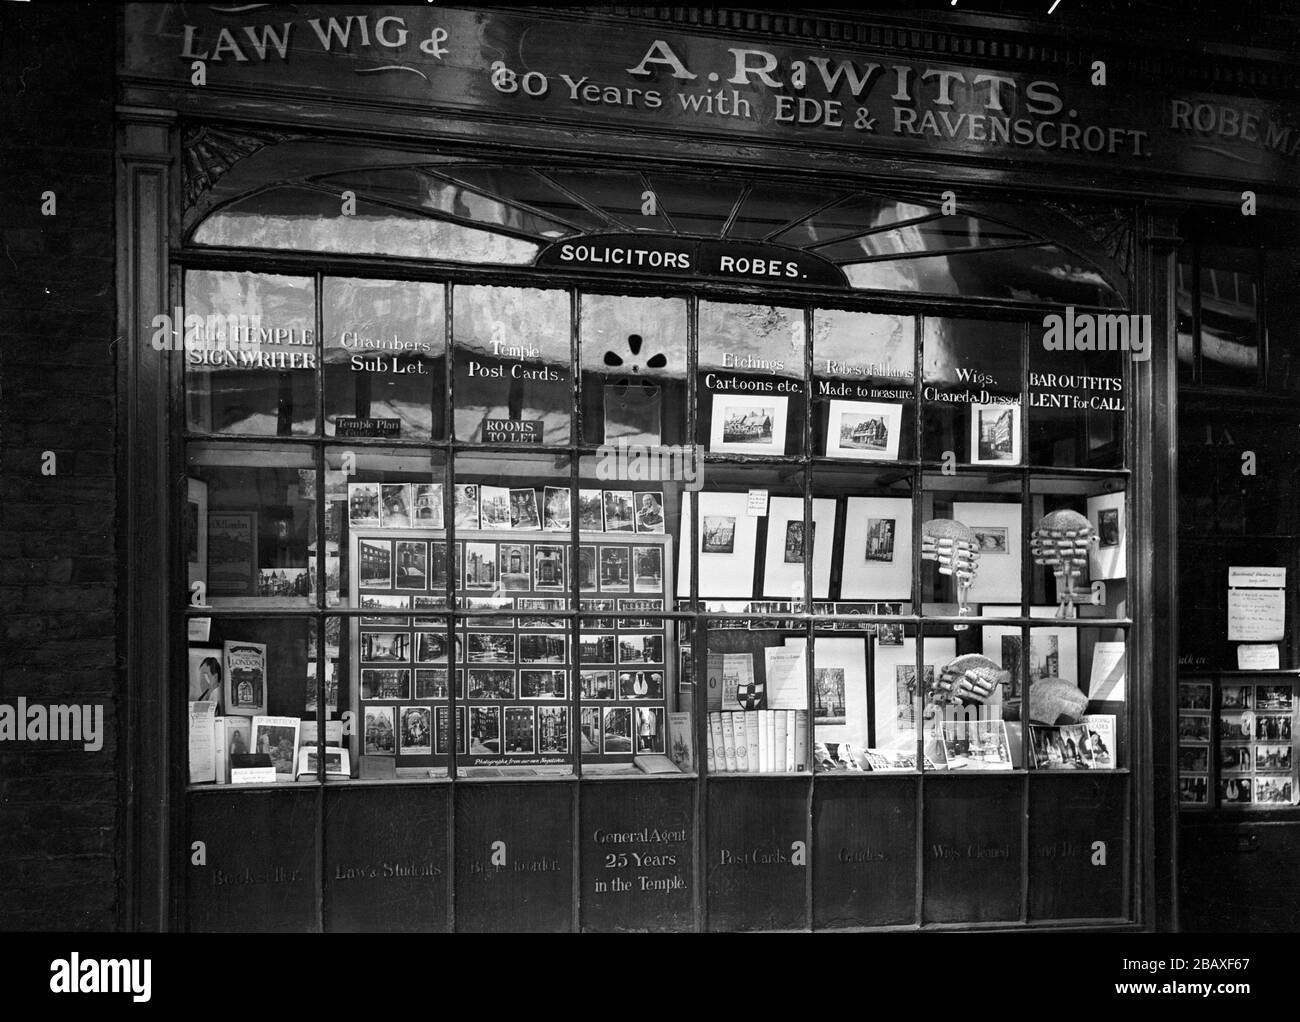 Exterior view of the window display and entrance to A.R. Witts, a judicial  supplies store selling law wigs and robes, London, England, United Kingdom,  1921. A sign on the store states '30